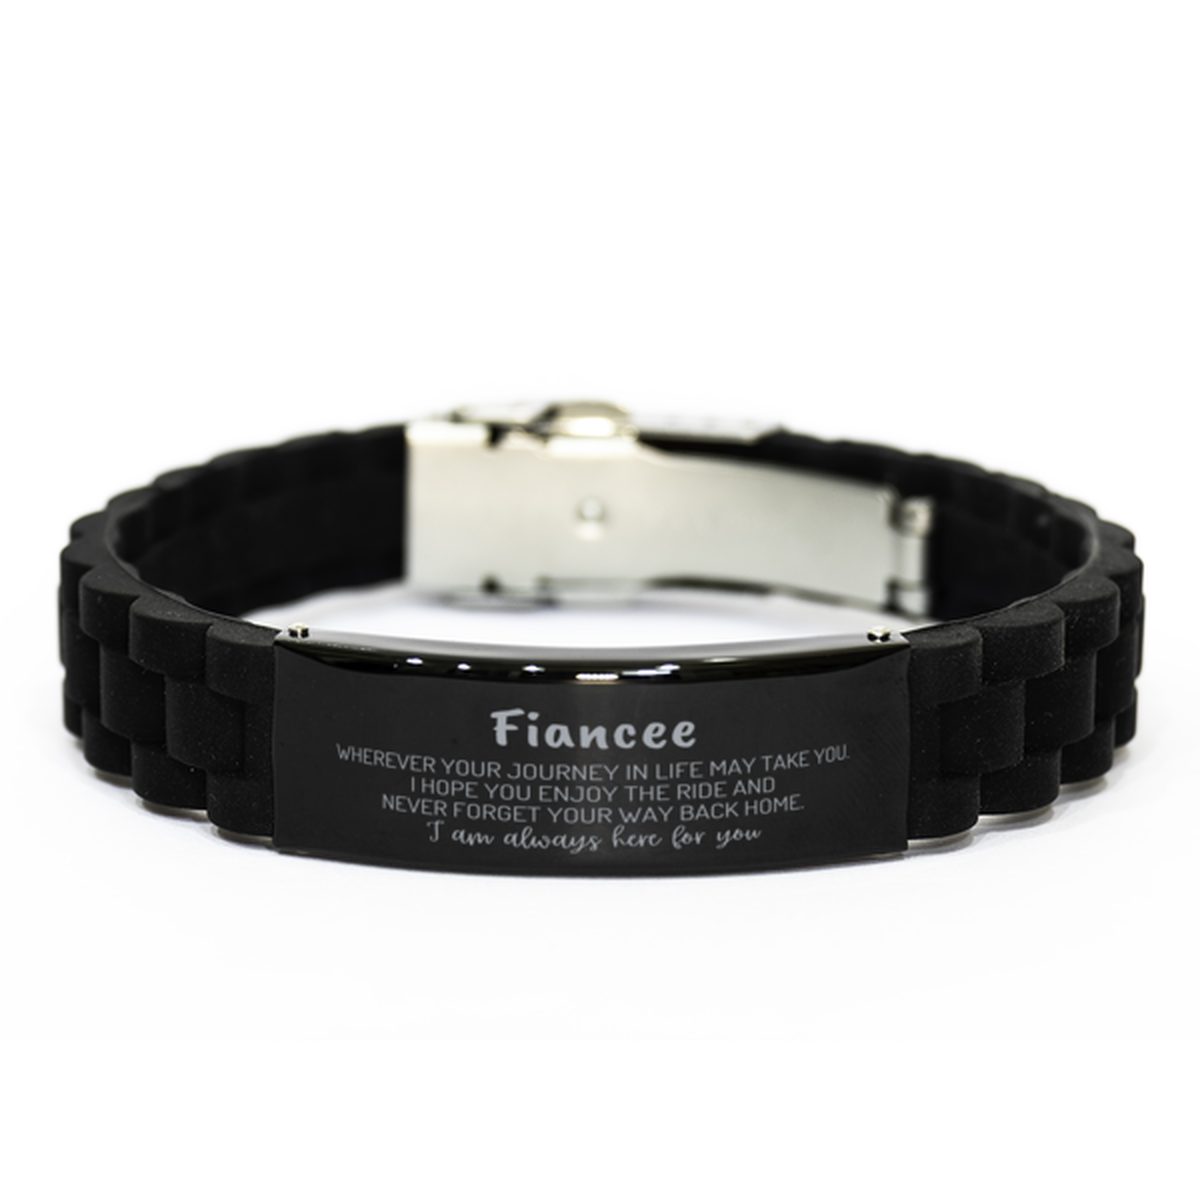 Fiancee wherever your journey in life may take you, I am always here for you Fiancee Black Glidelock Clasp Bracelet, Awesome Christmas Gifts For Fiancee, Fiancee Birthday Gifts for Men Women Family Loved One